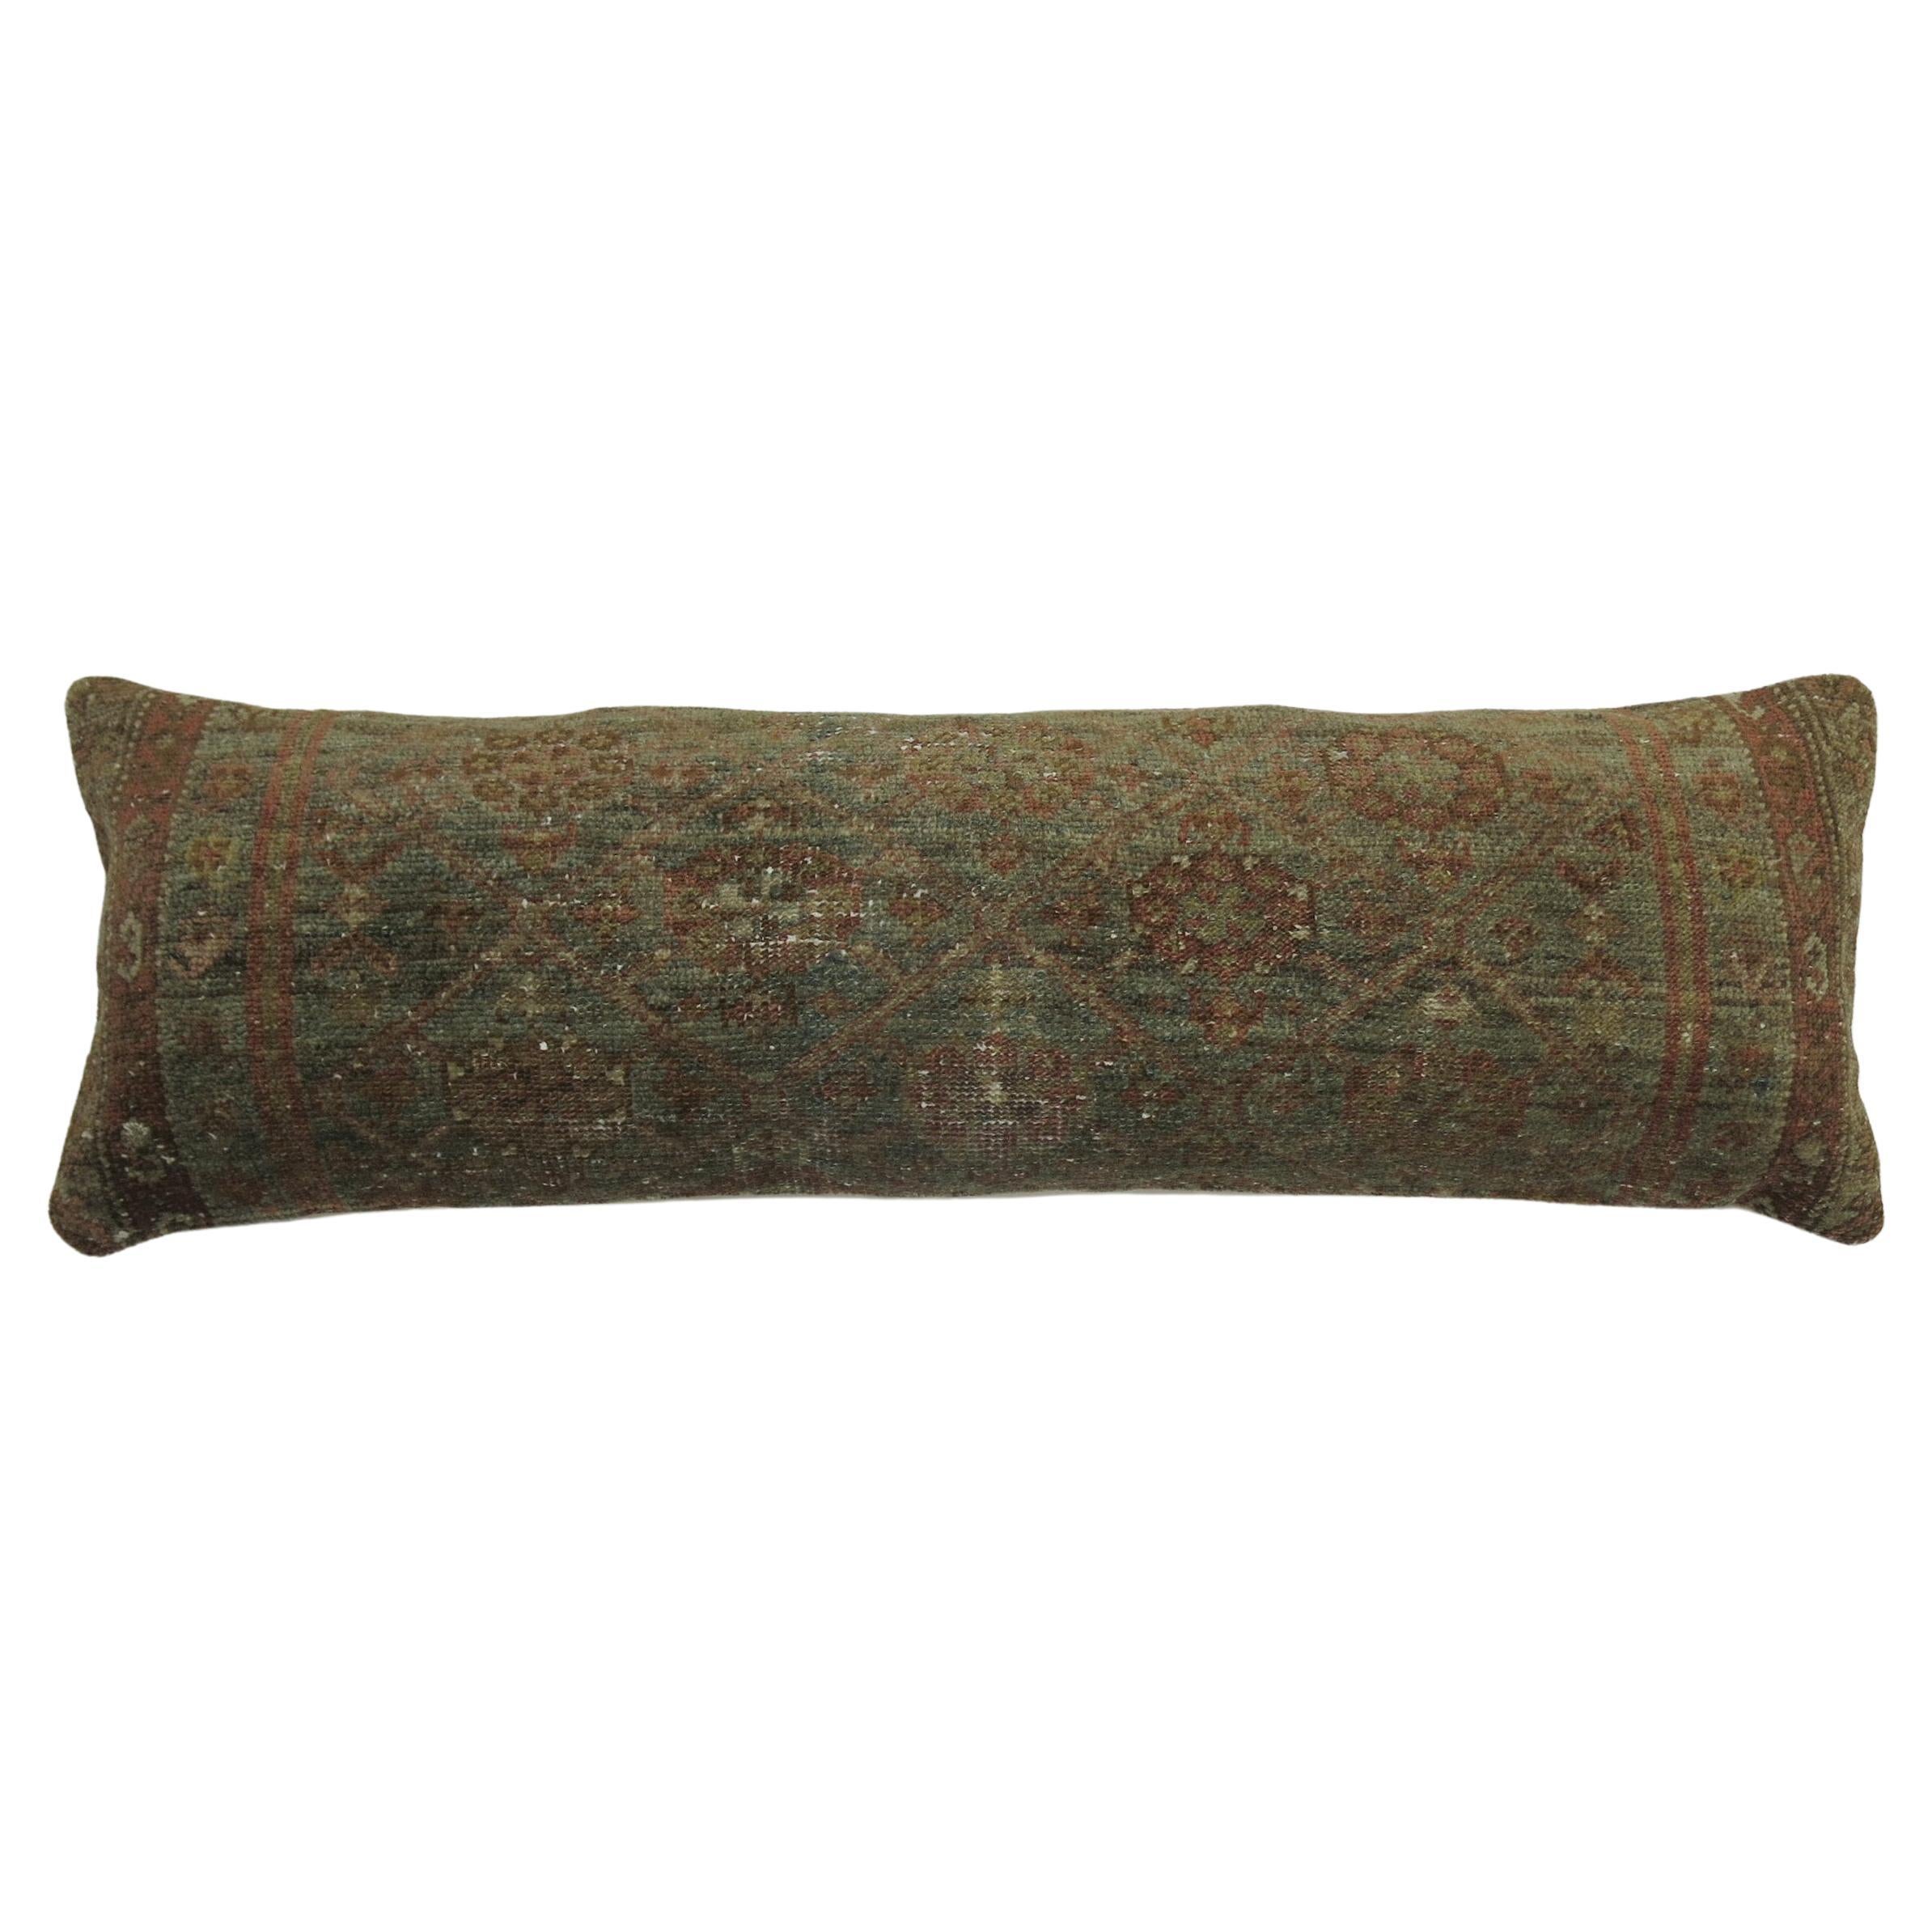  Narrow Antique Persian Bolster Rug Pillow For Sale